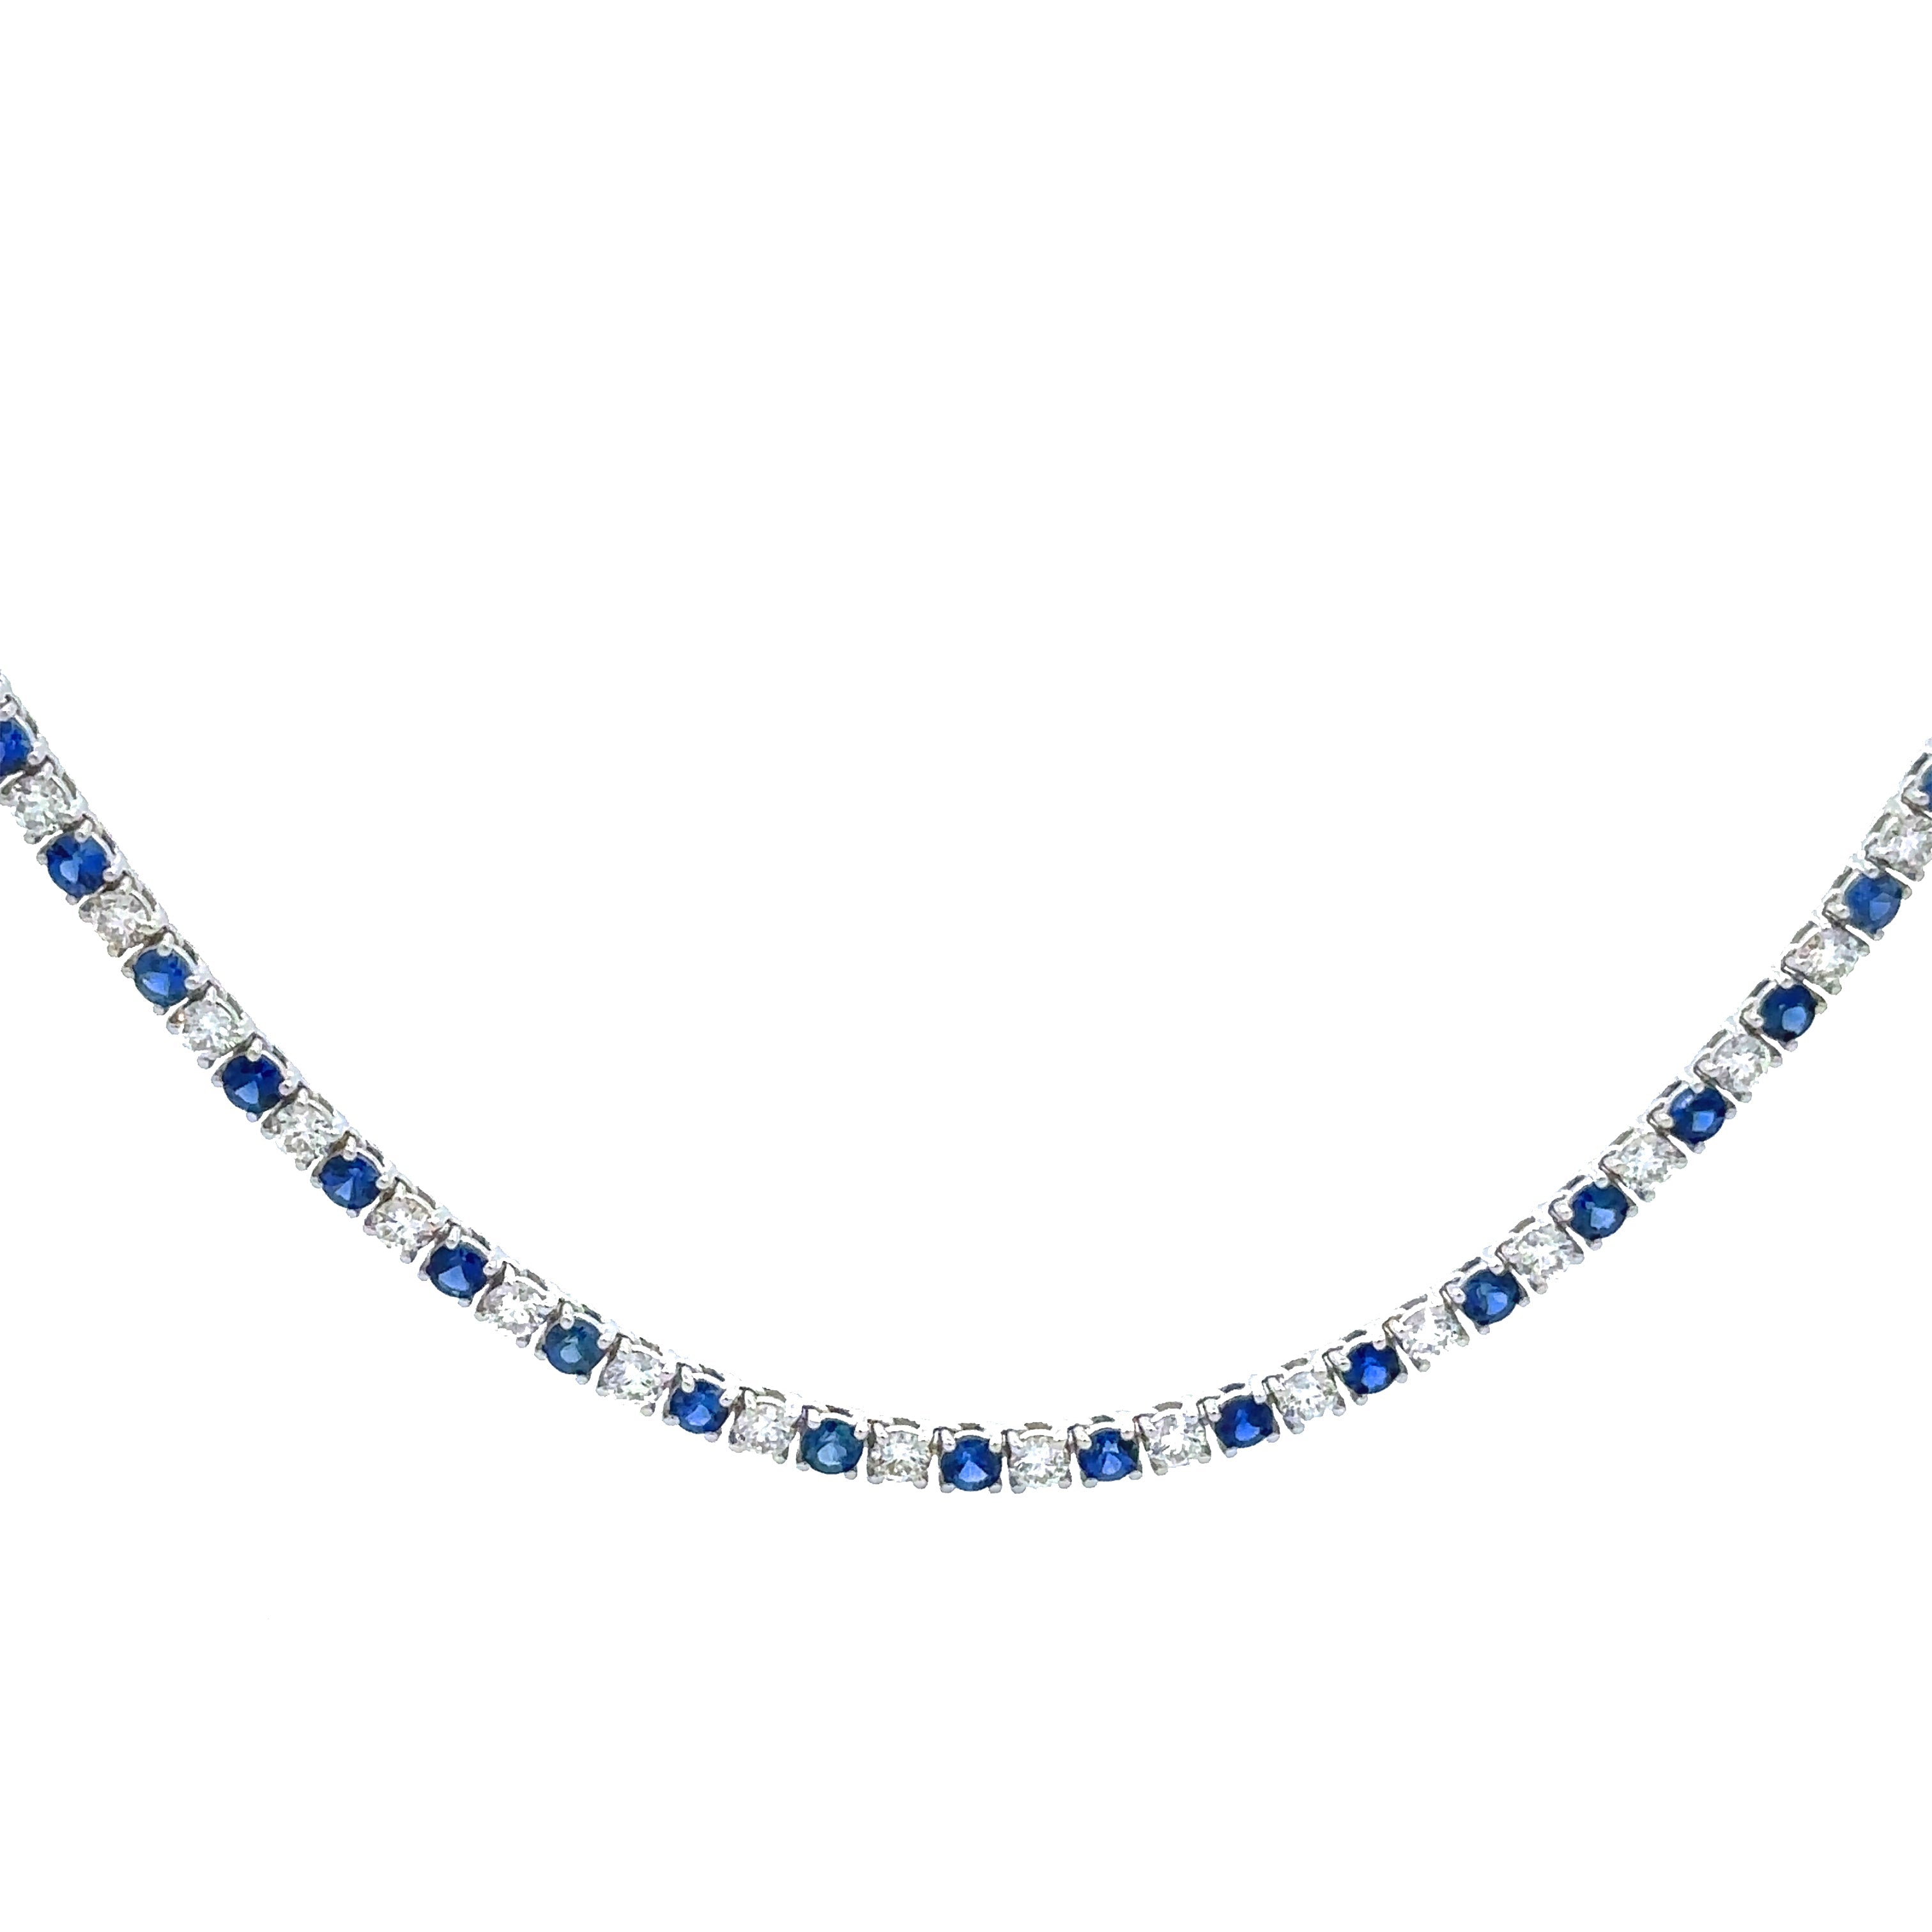 American Jewelry Designs 17" Four Prong Straight Sapphire & Diamond Necklace - Be On Park